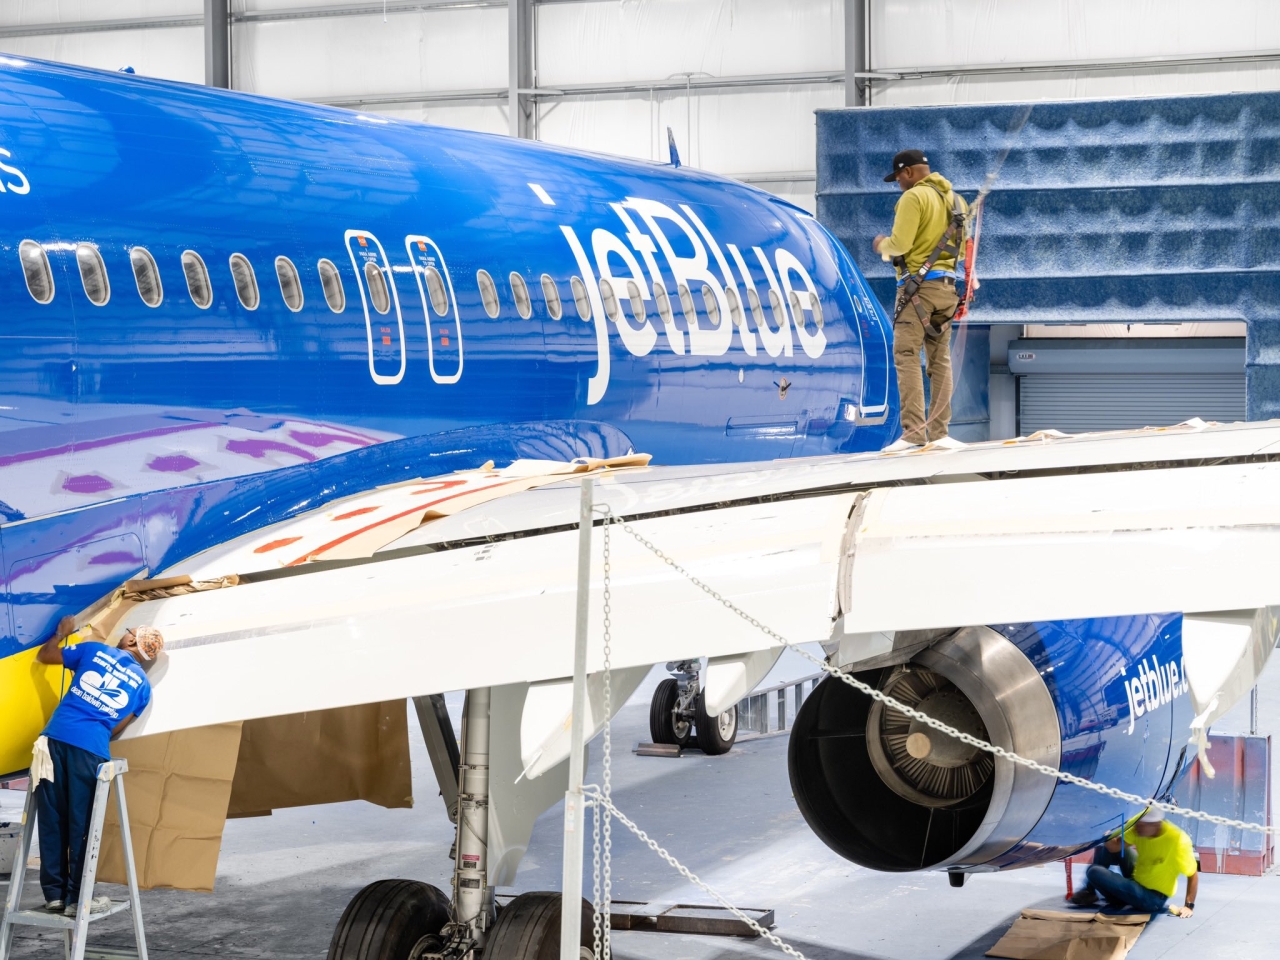 Man working on blue and yellow airplane in hangar